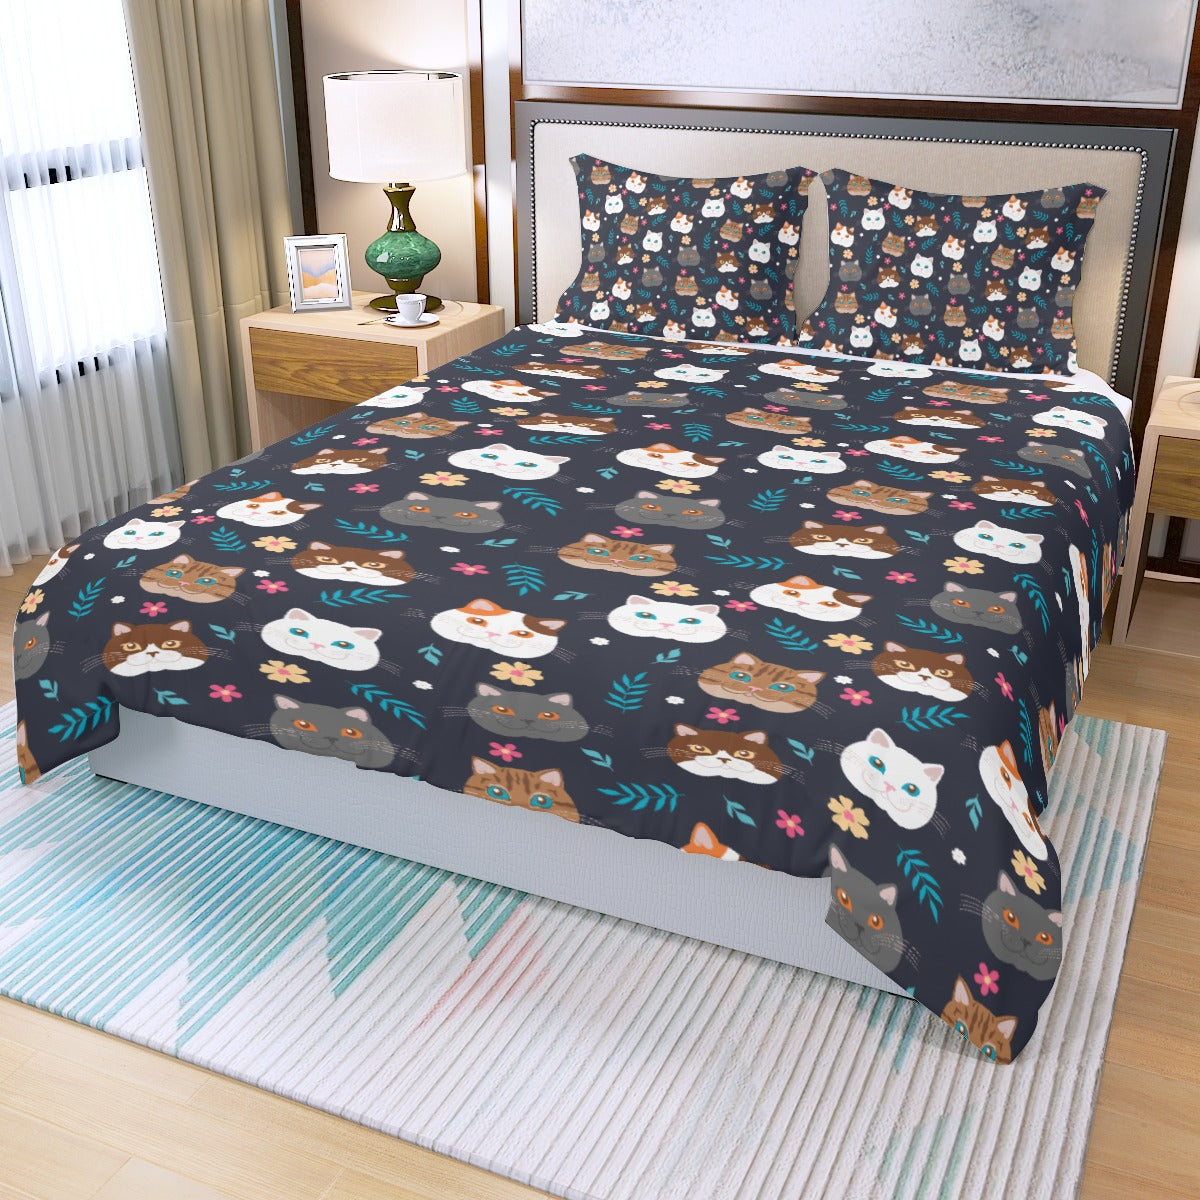 Cat Bedding Set, Kittens One Duvet Cover and Two Pillow Covers King Queen Full Twin Bed Bedroom Decor Starcove Fashion